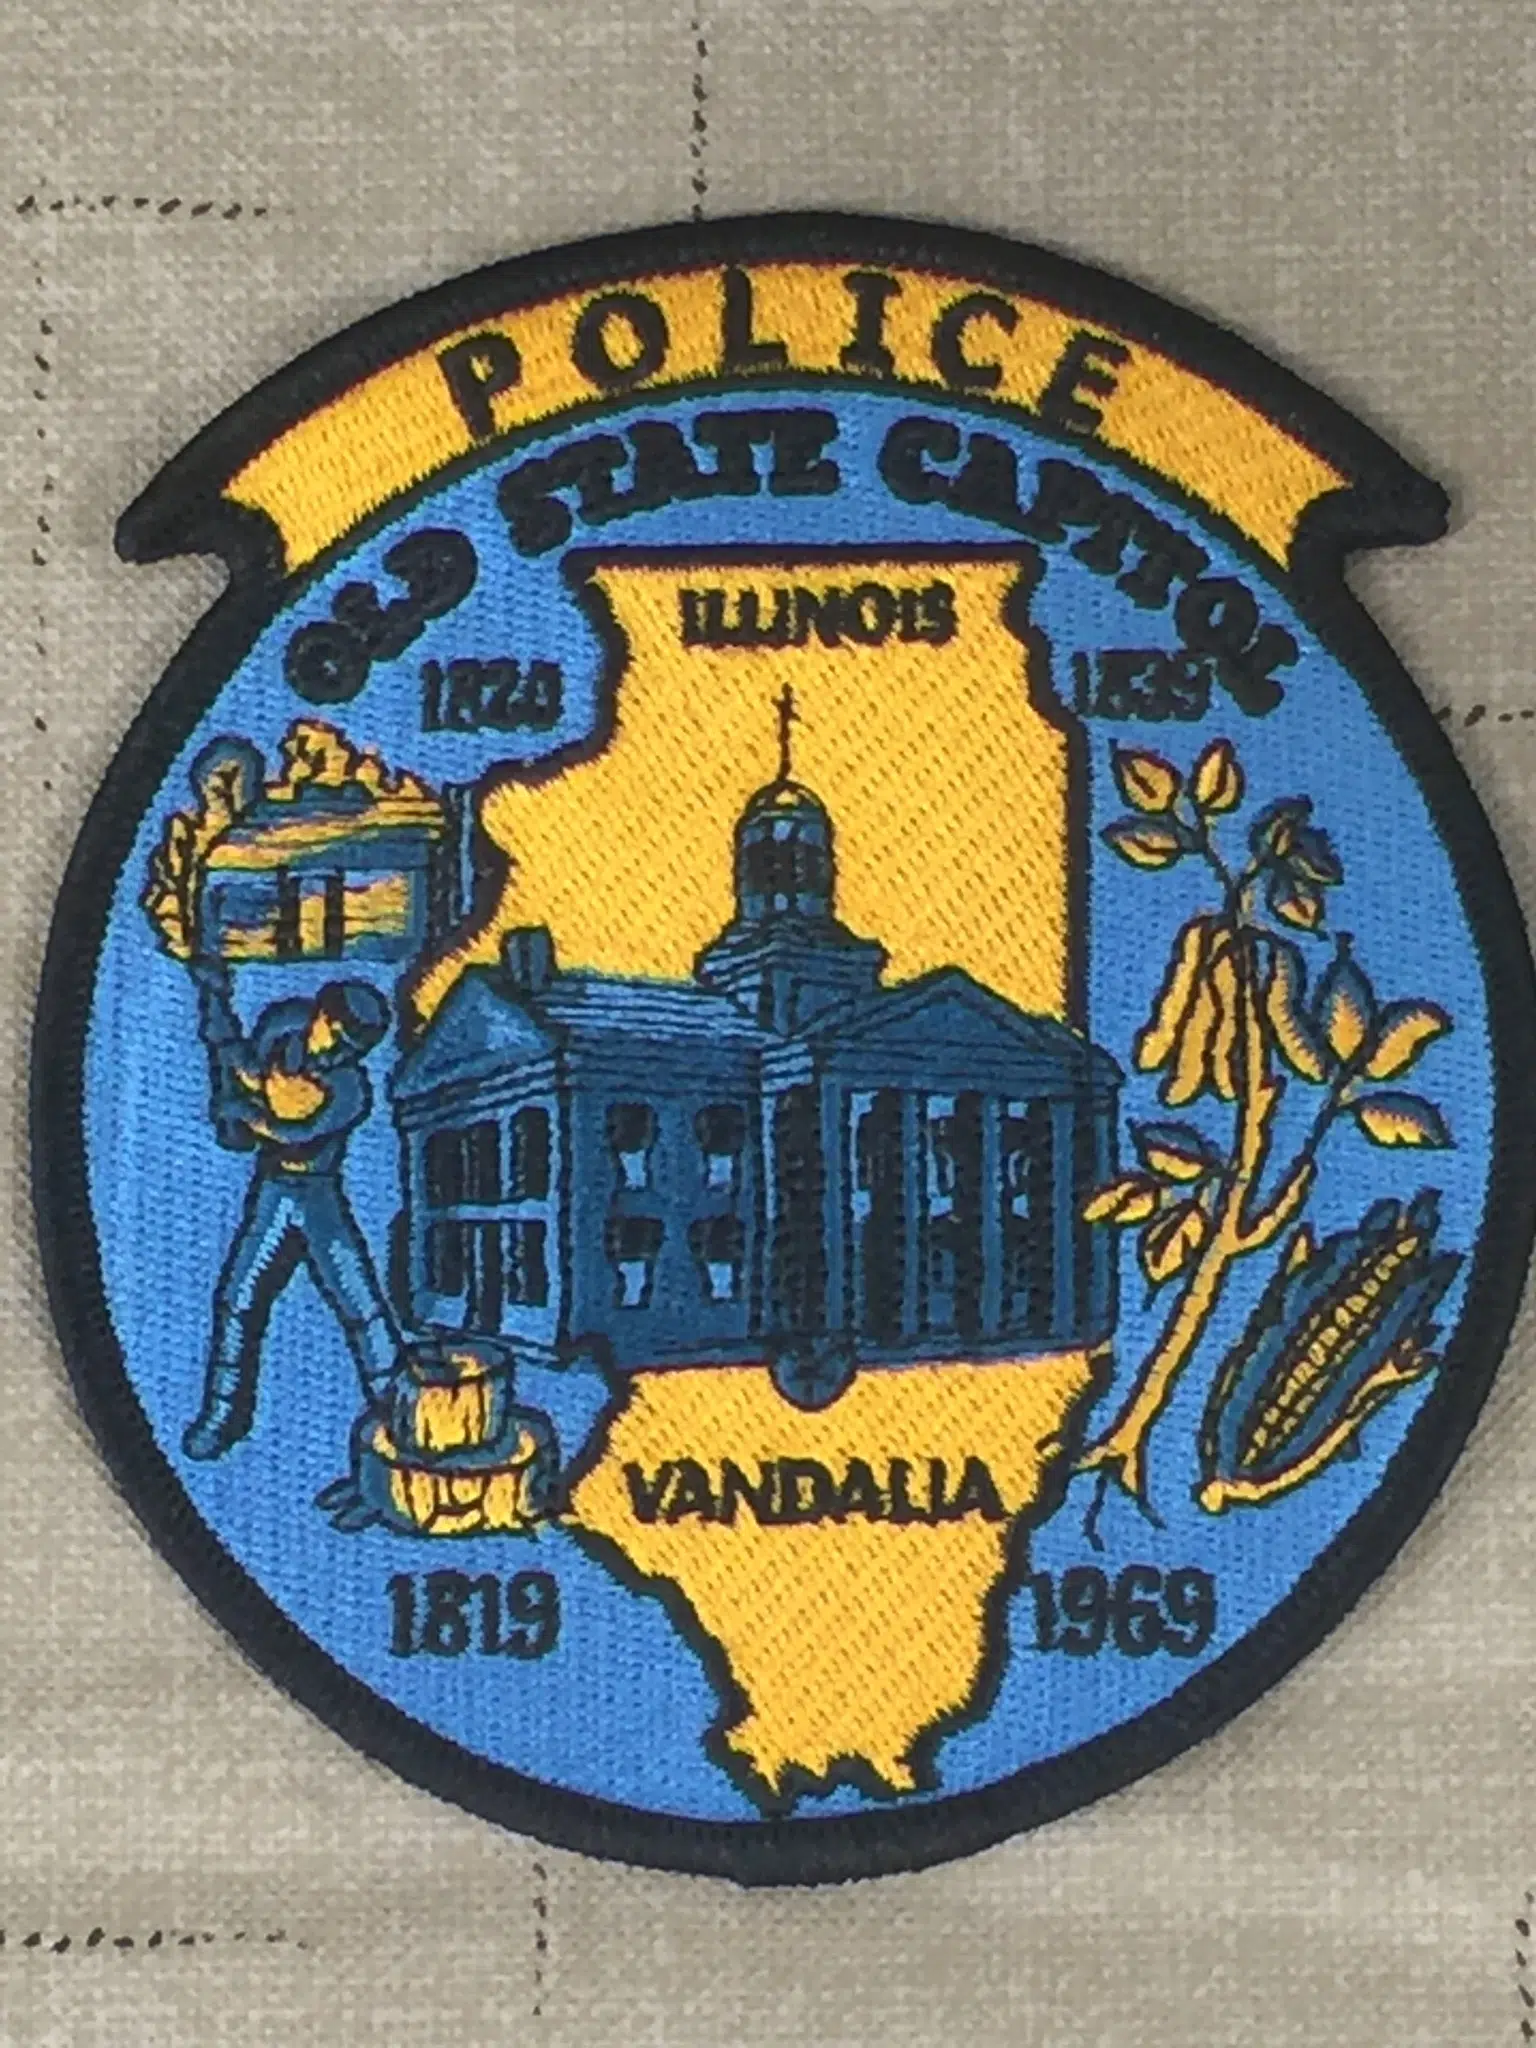 Vandalia PD catches 14 year old driving, charges individual with allegedly allowing the Juvenile to drive